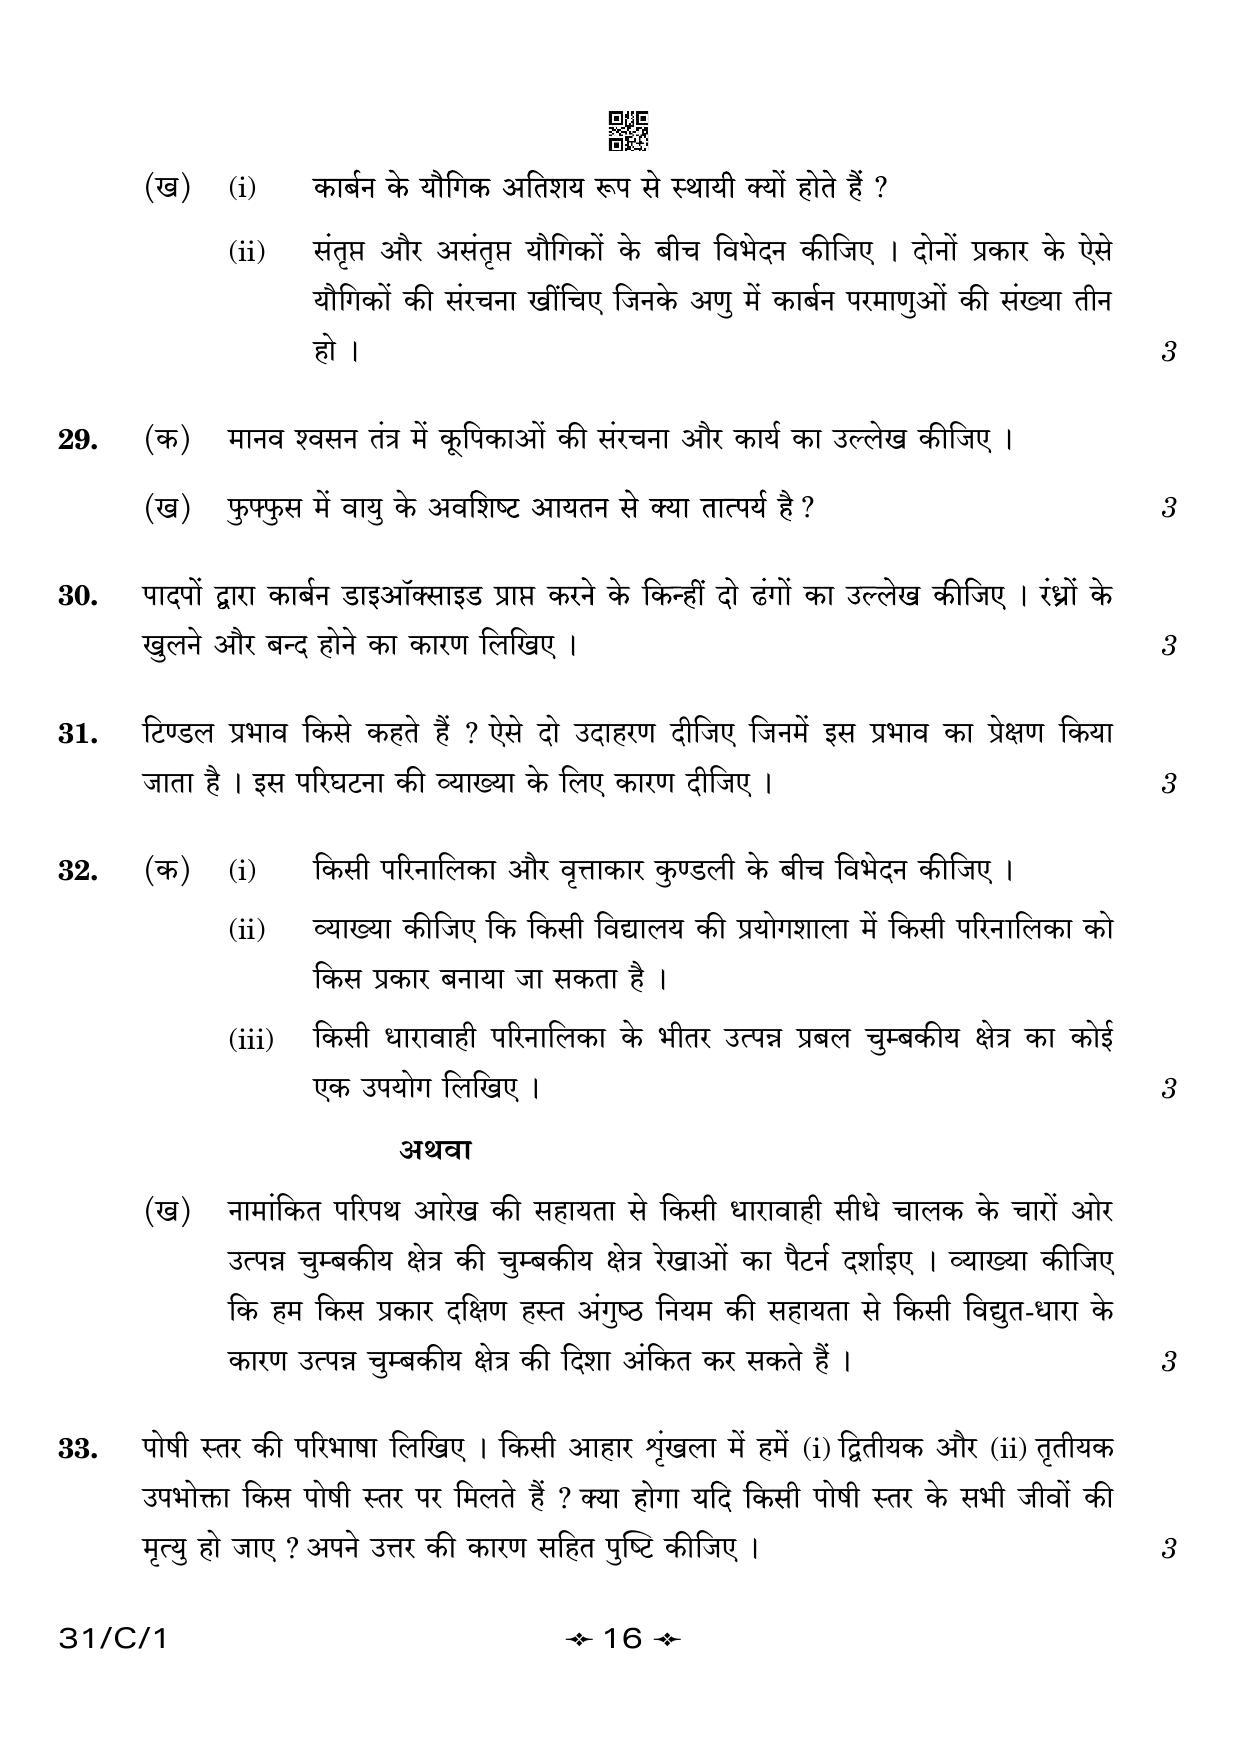 CBSE Class 10 31-1 Science 2023 (Compartment) Question Paper - Page 16